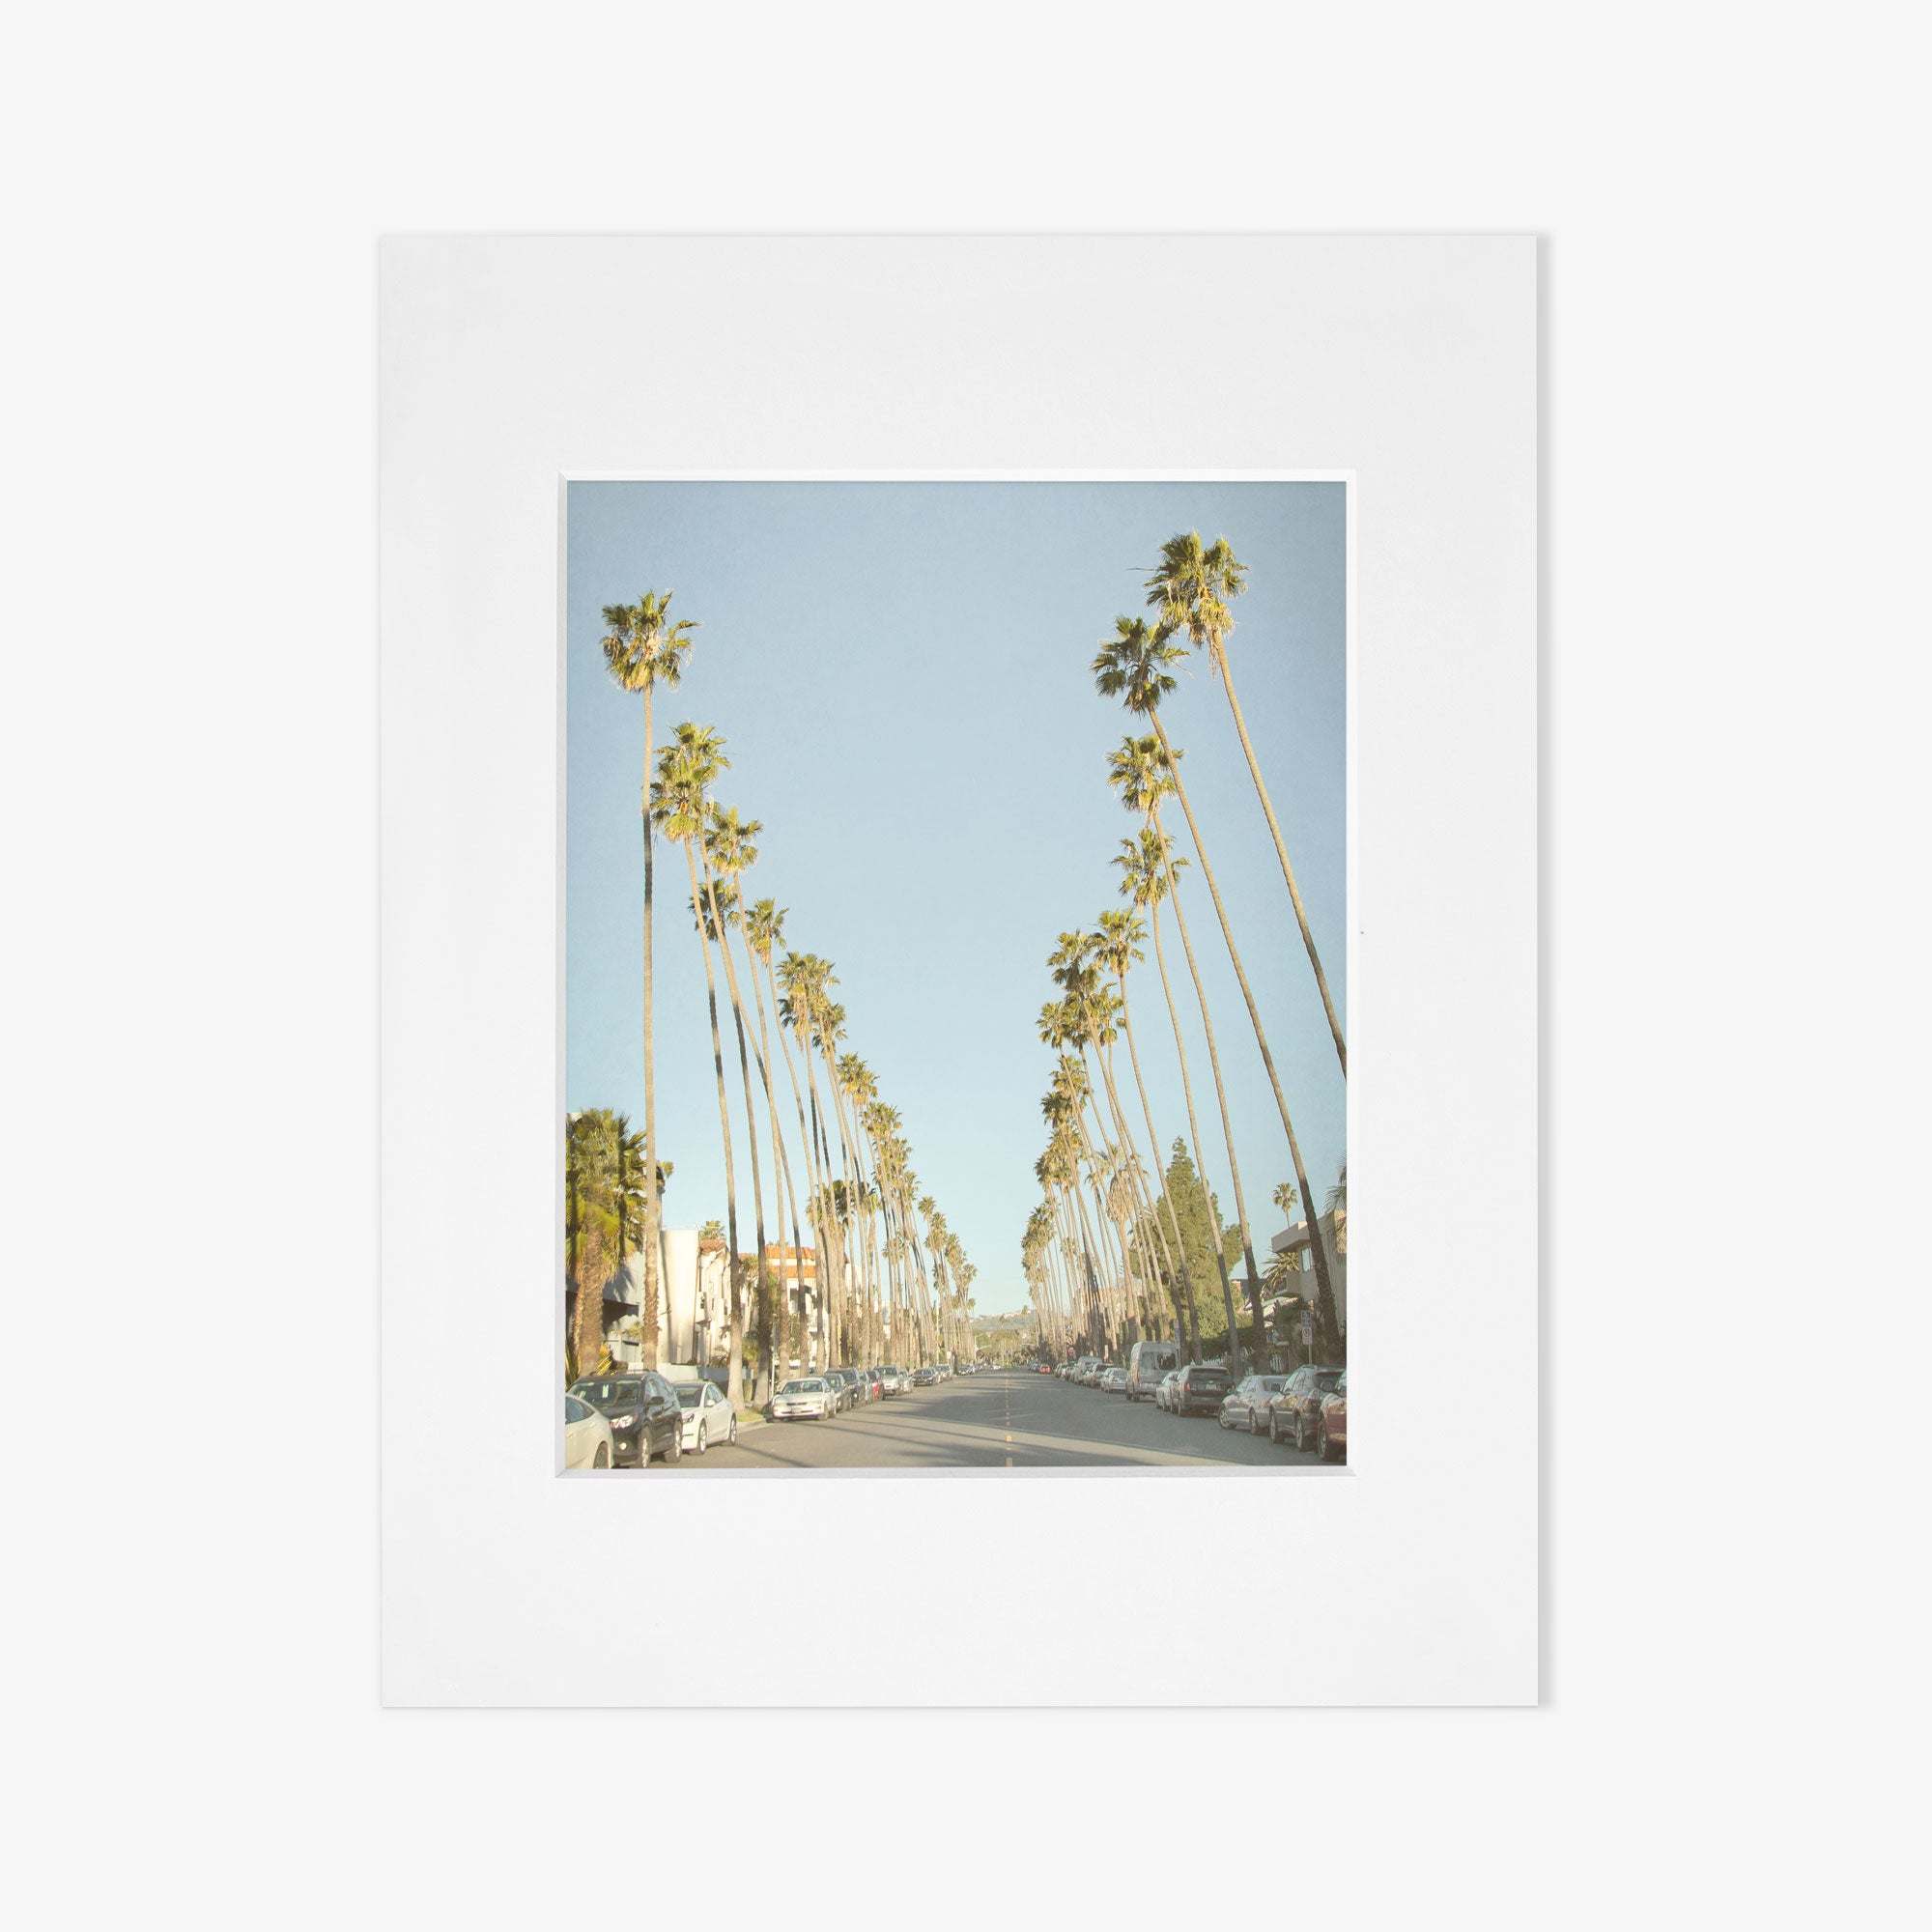 A simplistic white square frame with a clean design, showcasing an empty gray central area suitable for displaying artwork or a photograph of Los Angeles Palm Tree Lined Street &#39;Sunset Boulevard Dreams&#39; by Offley Green.